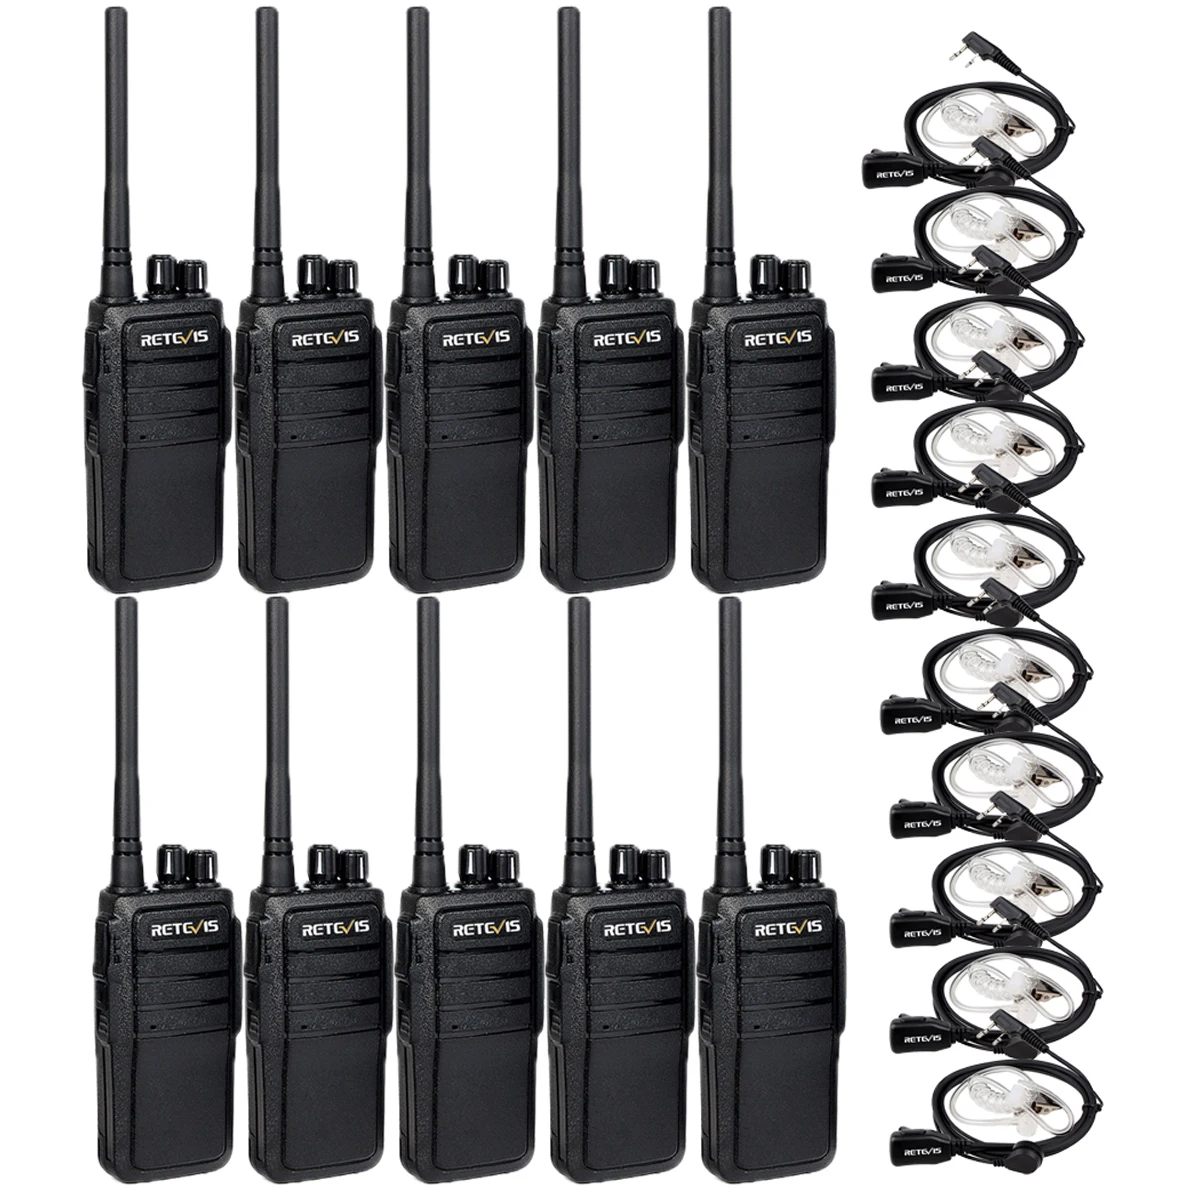 

Retevis RT21 Scrambler Squelch Security Walkie Talkies UHF 400-480MHz 16CH VOX Two Way Radio Rechargeable +2Pin Earpieces